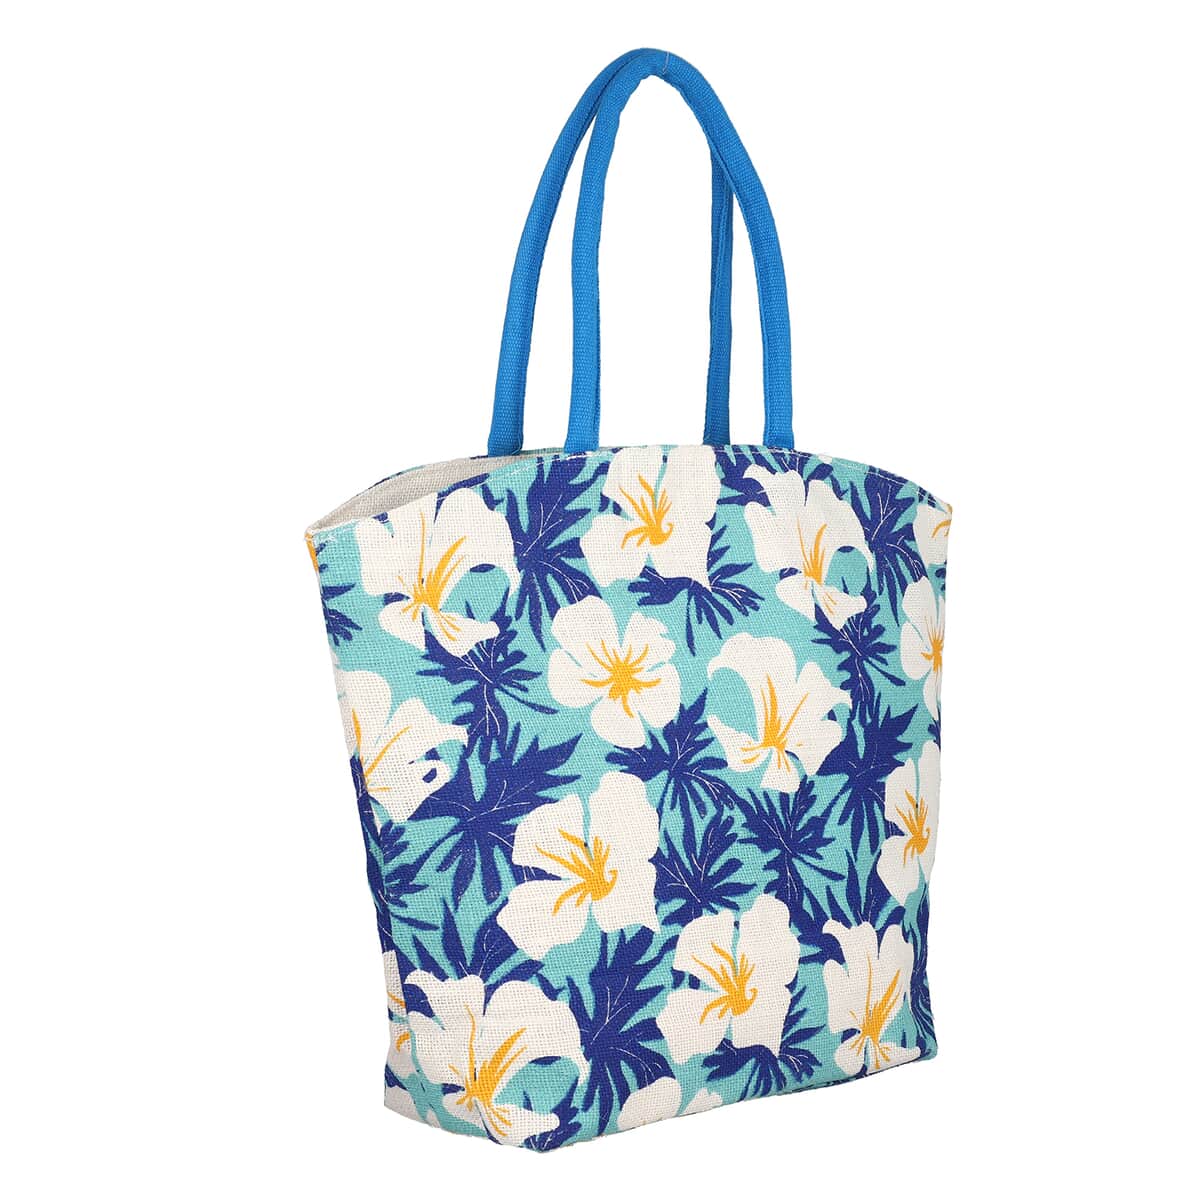 Blue & White 100% Natural Jute Pineapple Printed Tote with Polyester Interior (18.5"x5"x13") image number 2